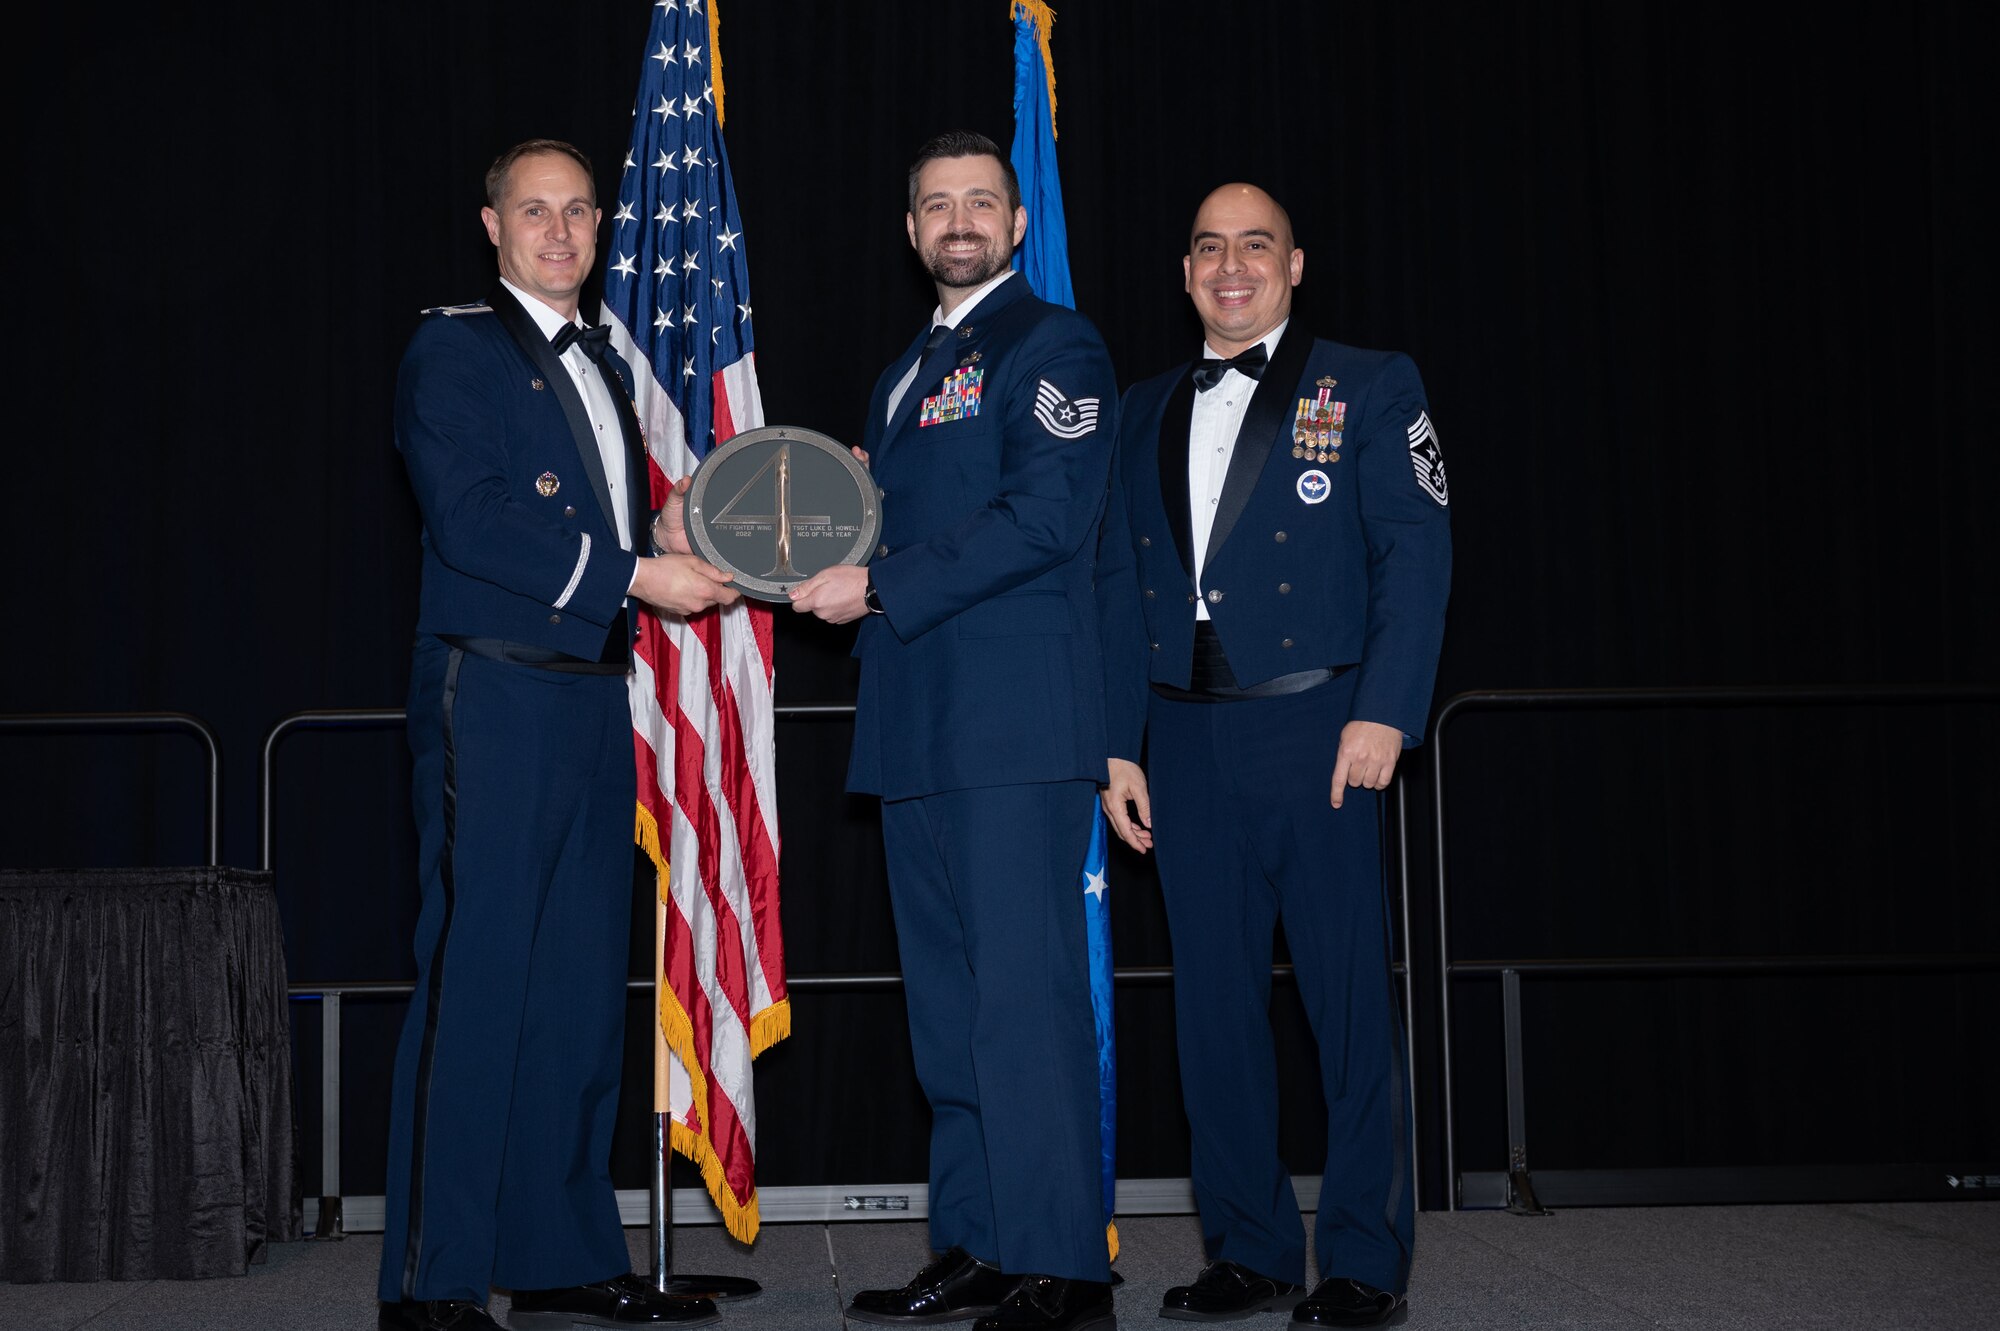 Tech Sgt. Luke Howell, center, 4th Operations Group section chief, receives the Non-commissioned Officer of the Year Award from Col. Lucas Teel, 4th Fighter Wing commander, and Chief Master Sgt. Peter Martinez, 4th FW command chief, during the 2022 Annual Awards ceremony at the Maxwell Center, Goldsboro, North Carolina, Feb. 3, 2023. Annual awards are awarded to Airmen and civilians in 13 different categories, including Volunteer of the Year, senior non-commissioned officer of the year, Key Spouse of the Year, Airman of the Year and more. (U.S. Air Force photo by Rebecca Sirimarco-Lang)